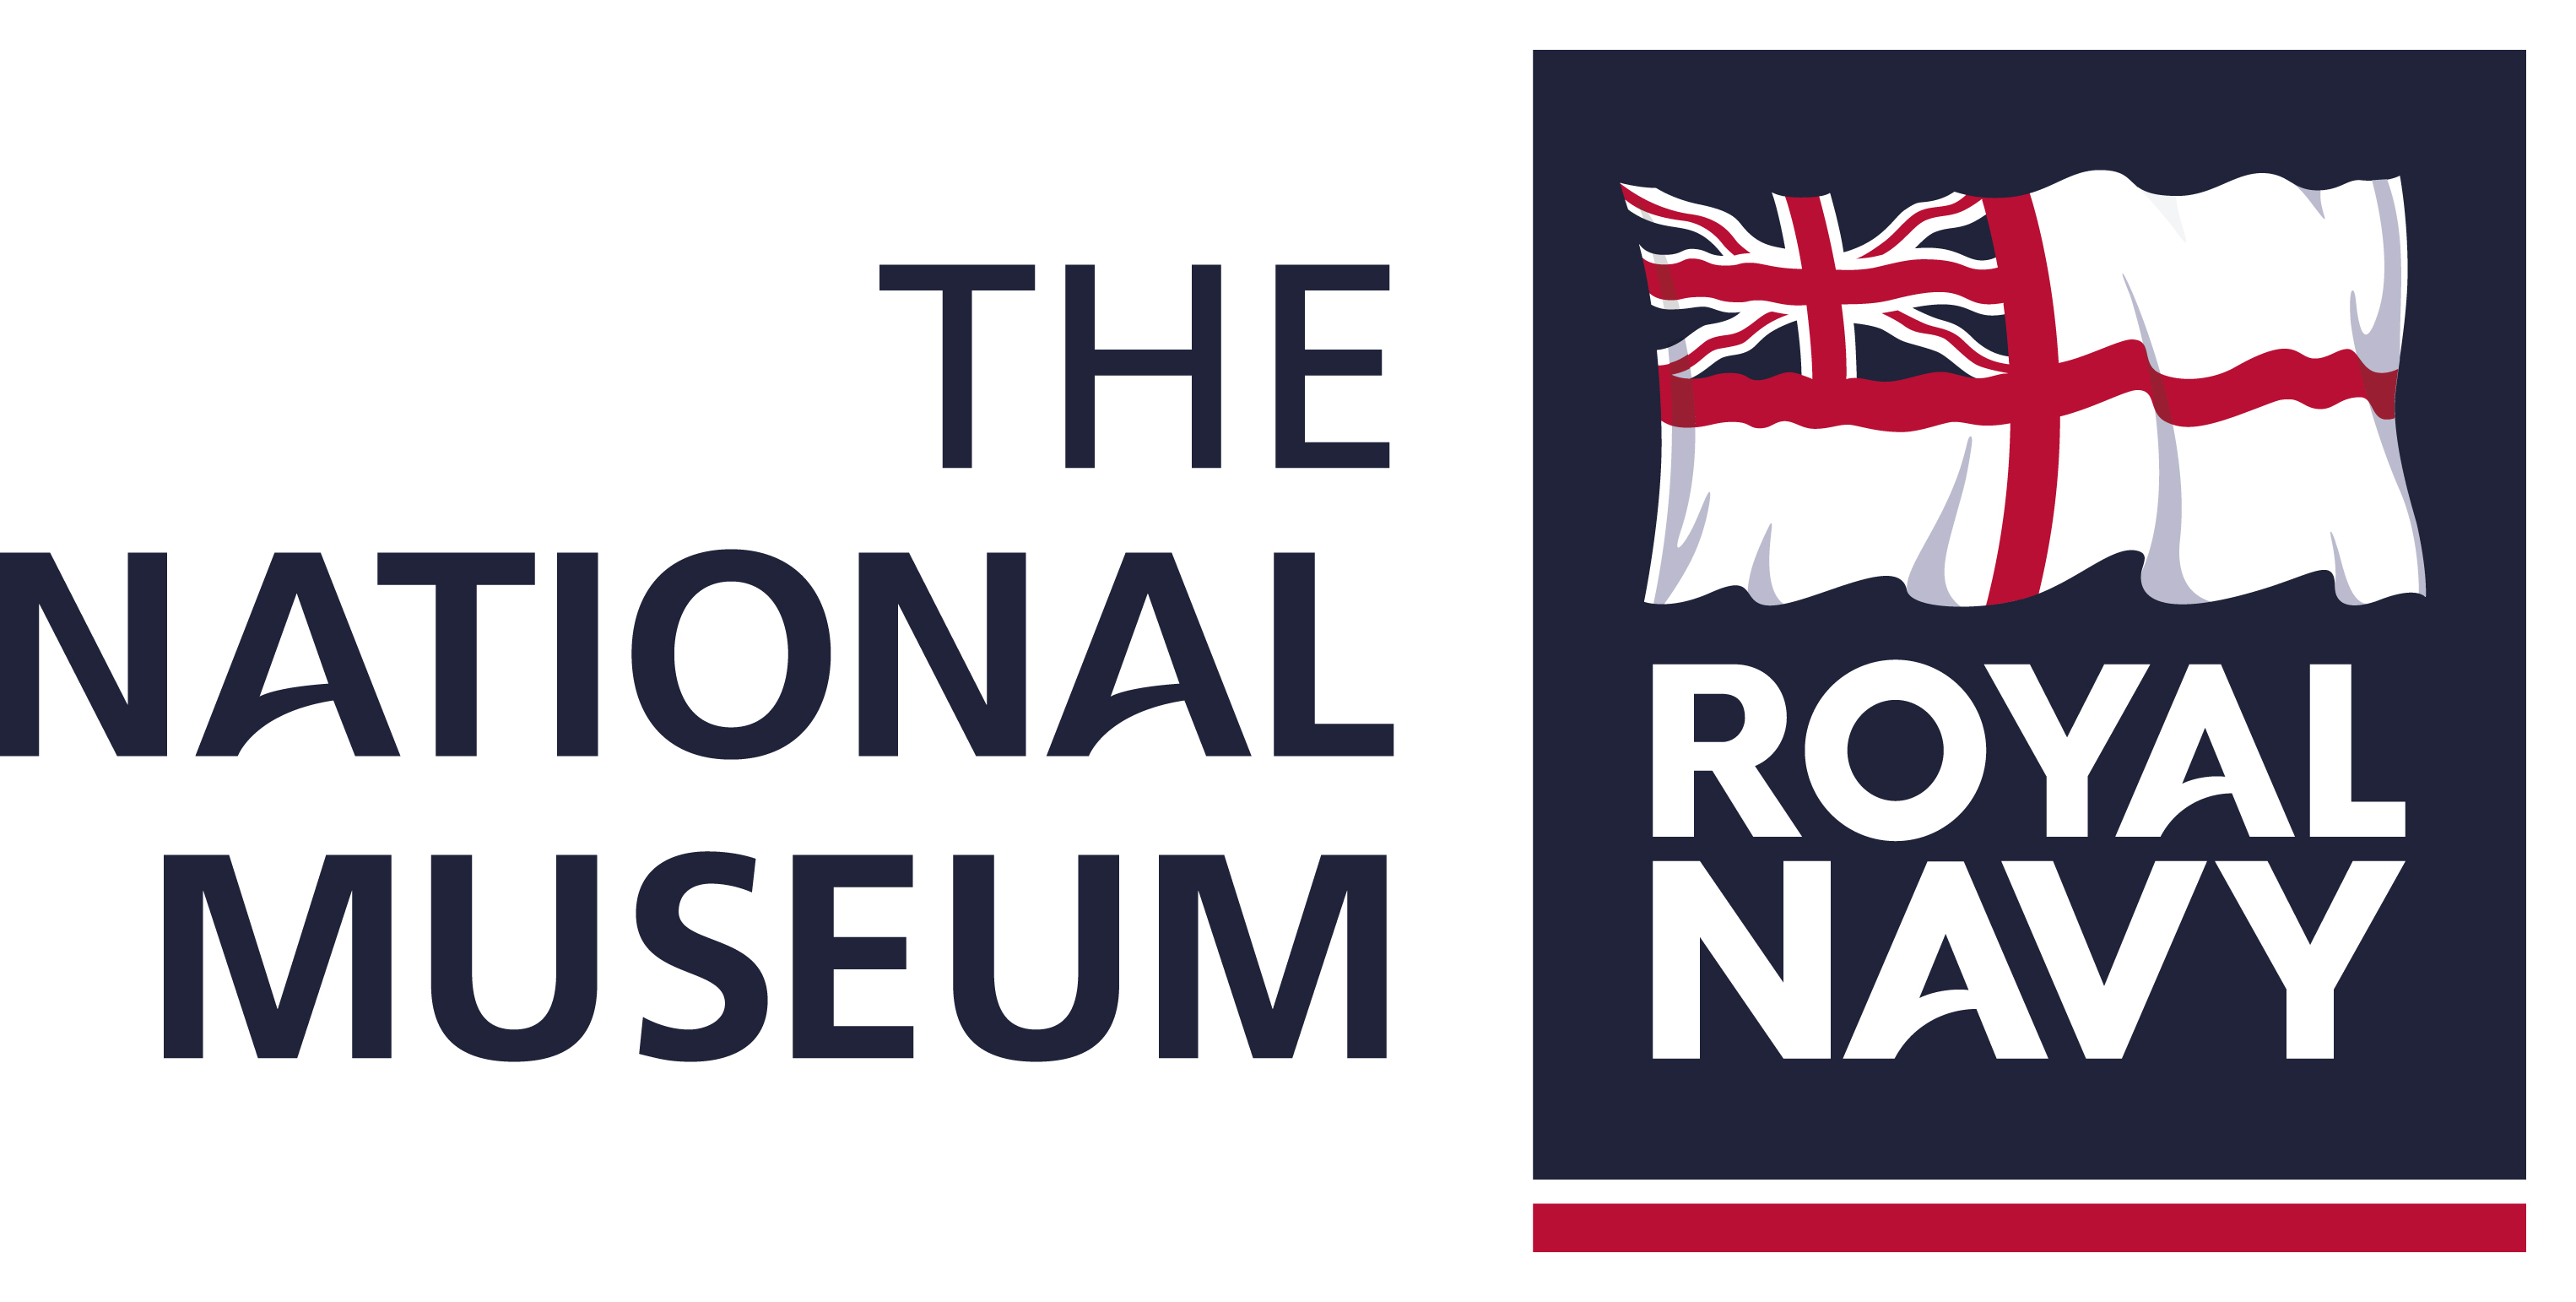 National Museum of Royal Navy logo in white, red and navy